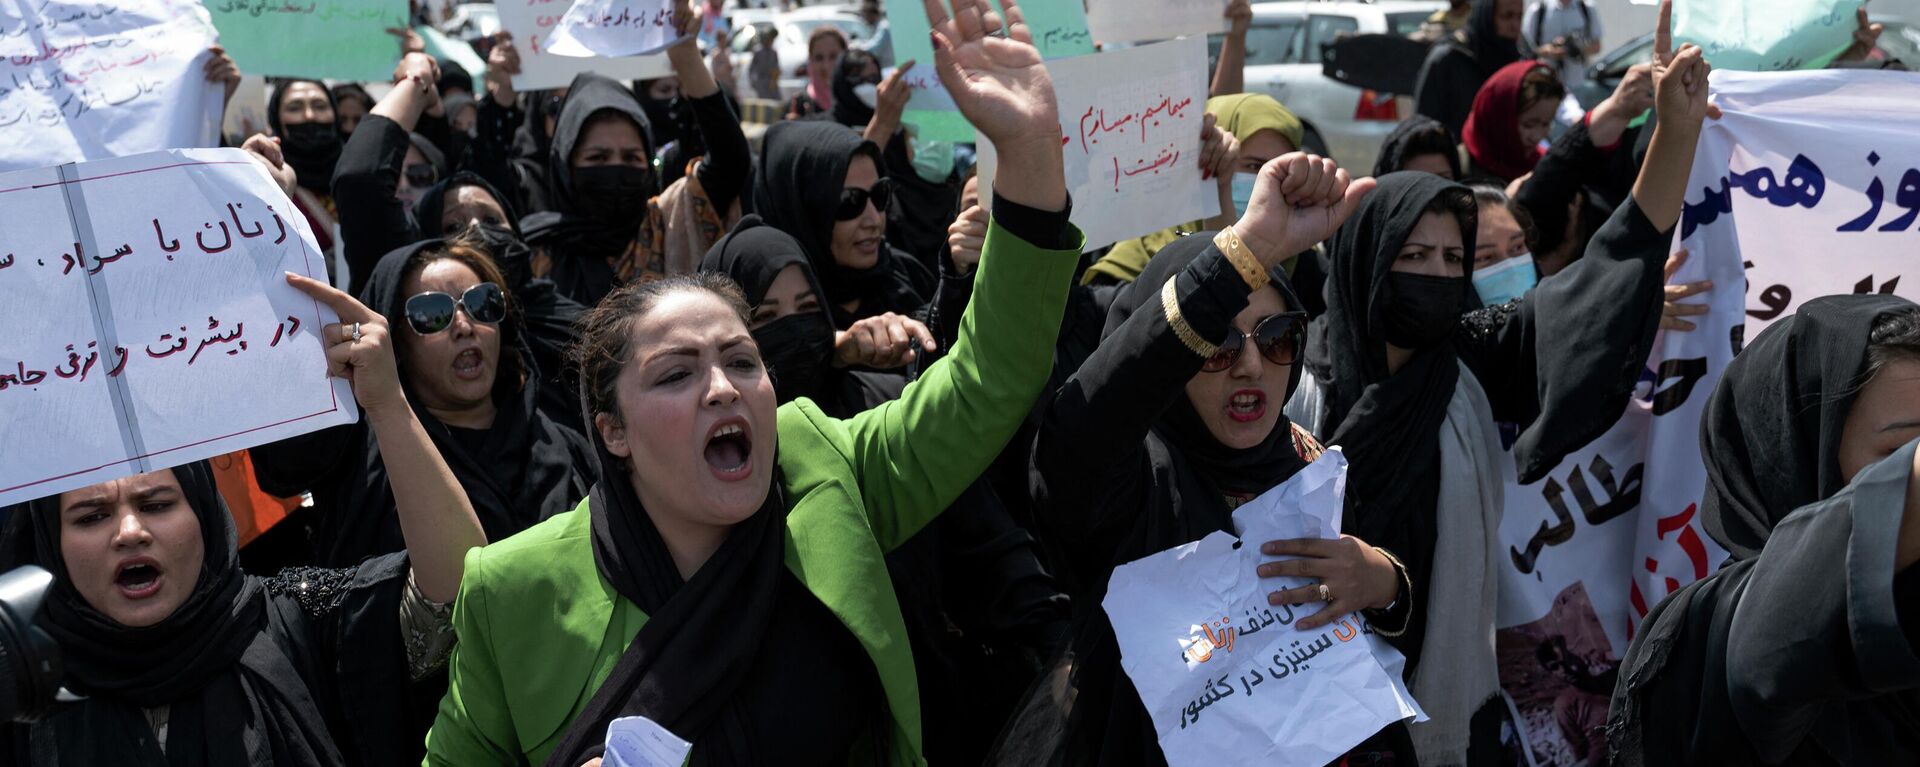 Afghan women hold placards as they march and shout slogans Bread, work, freedom during a womens' rights protest in Kabul on August 13, 2022. - Sputnik International, 1920, 13.08.2022